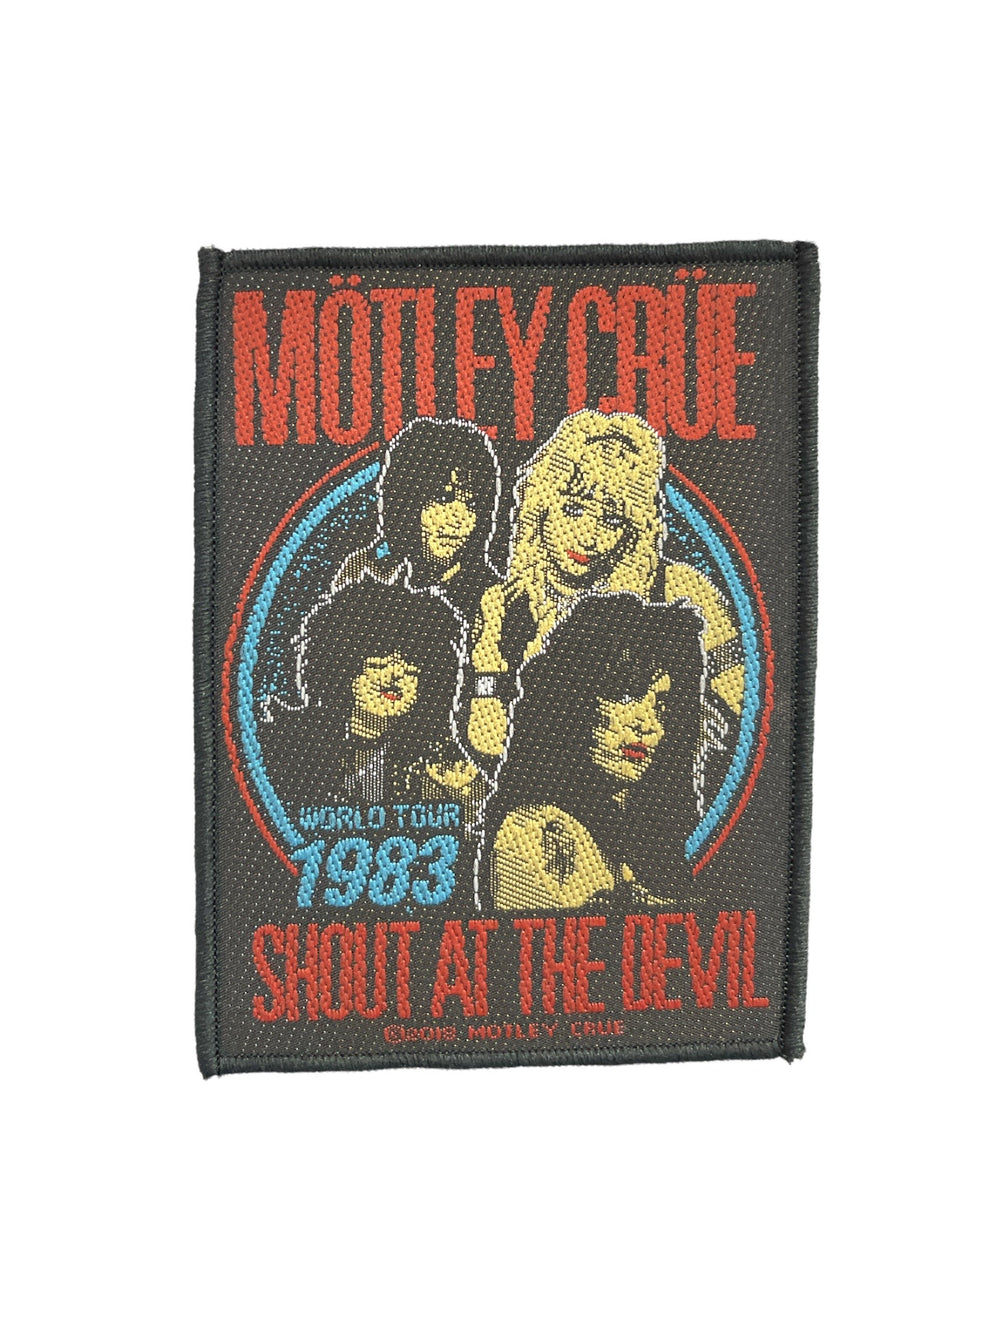 Motley Crue Shout At The Devil Official Woven Patch Brand New